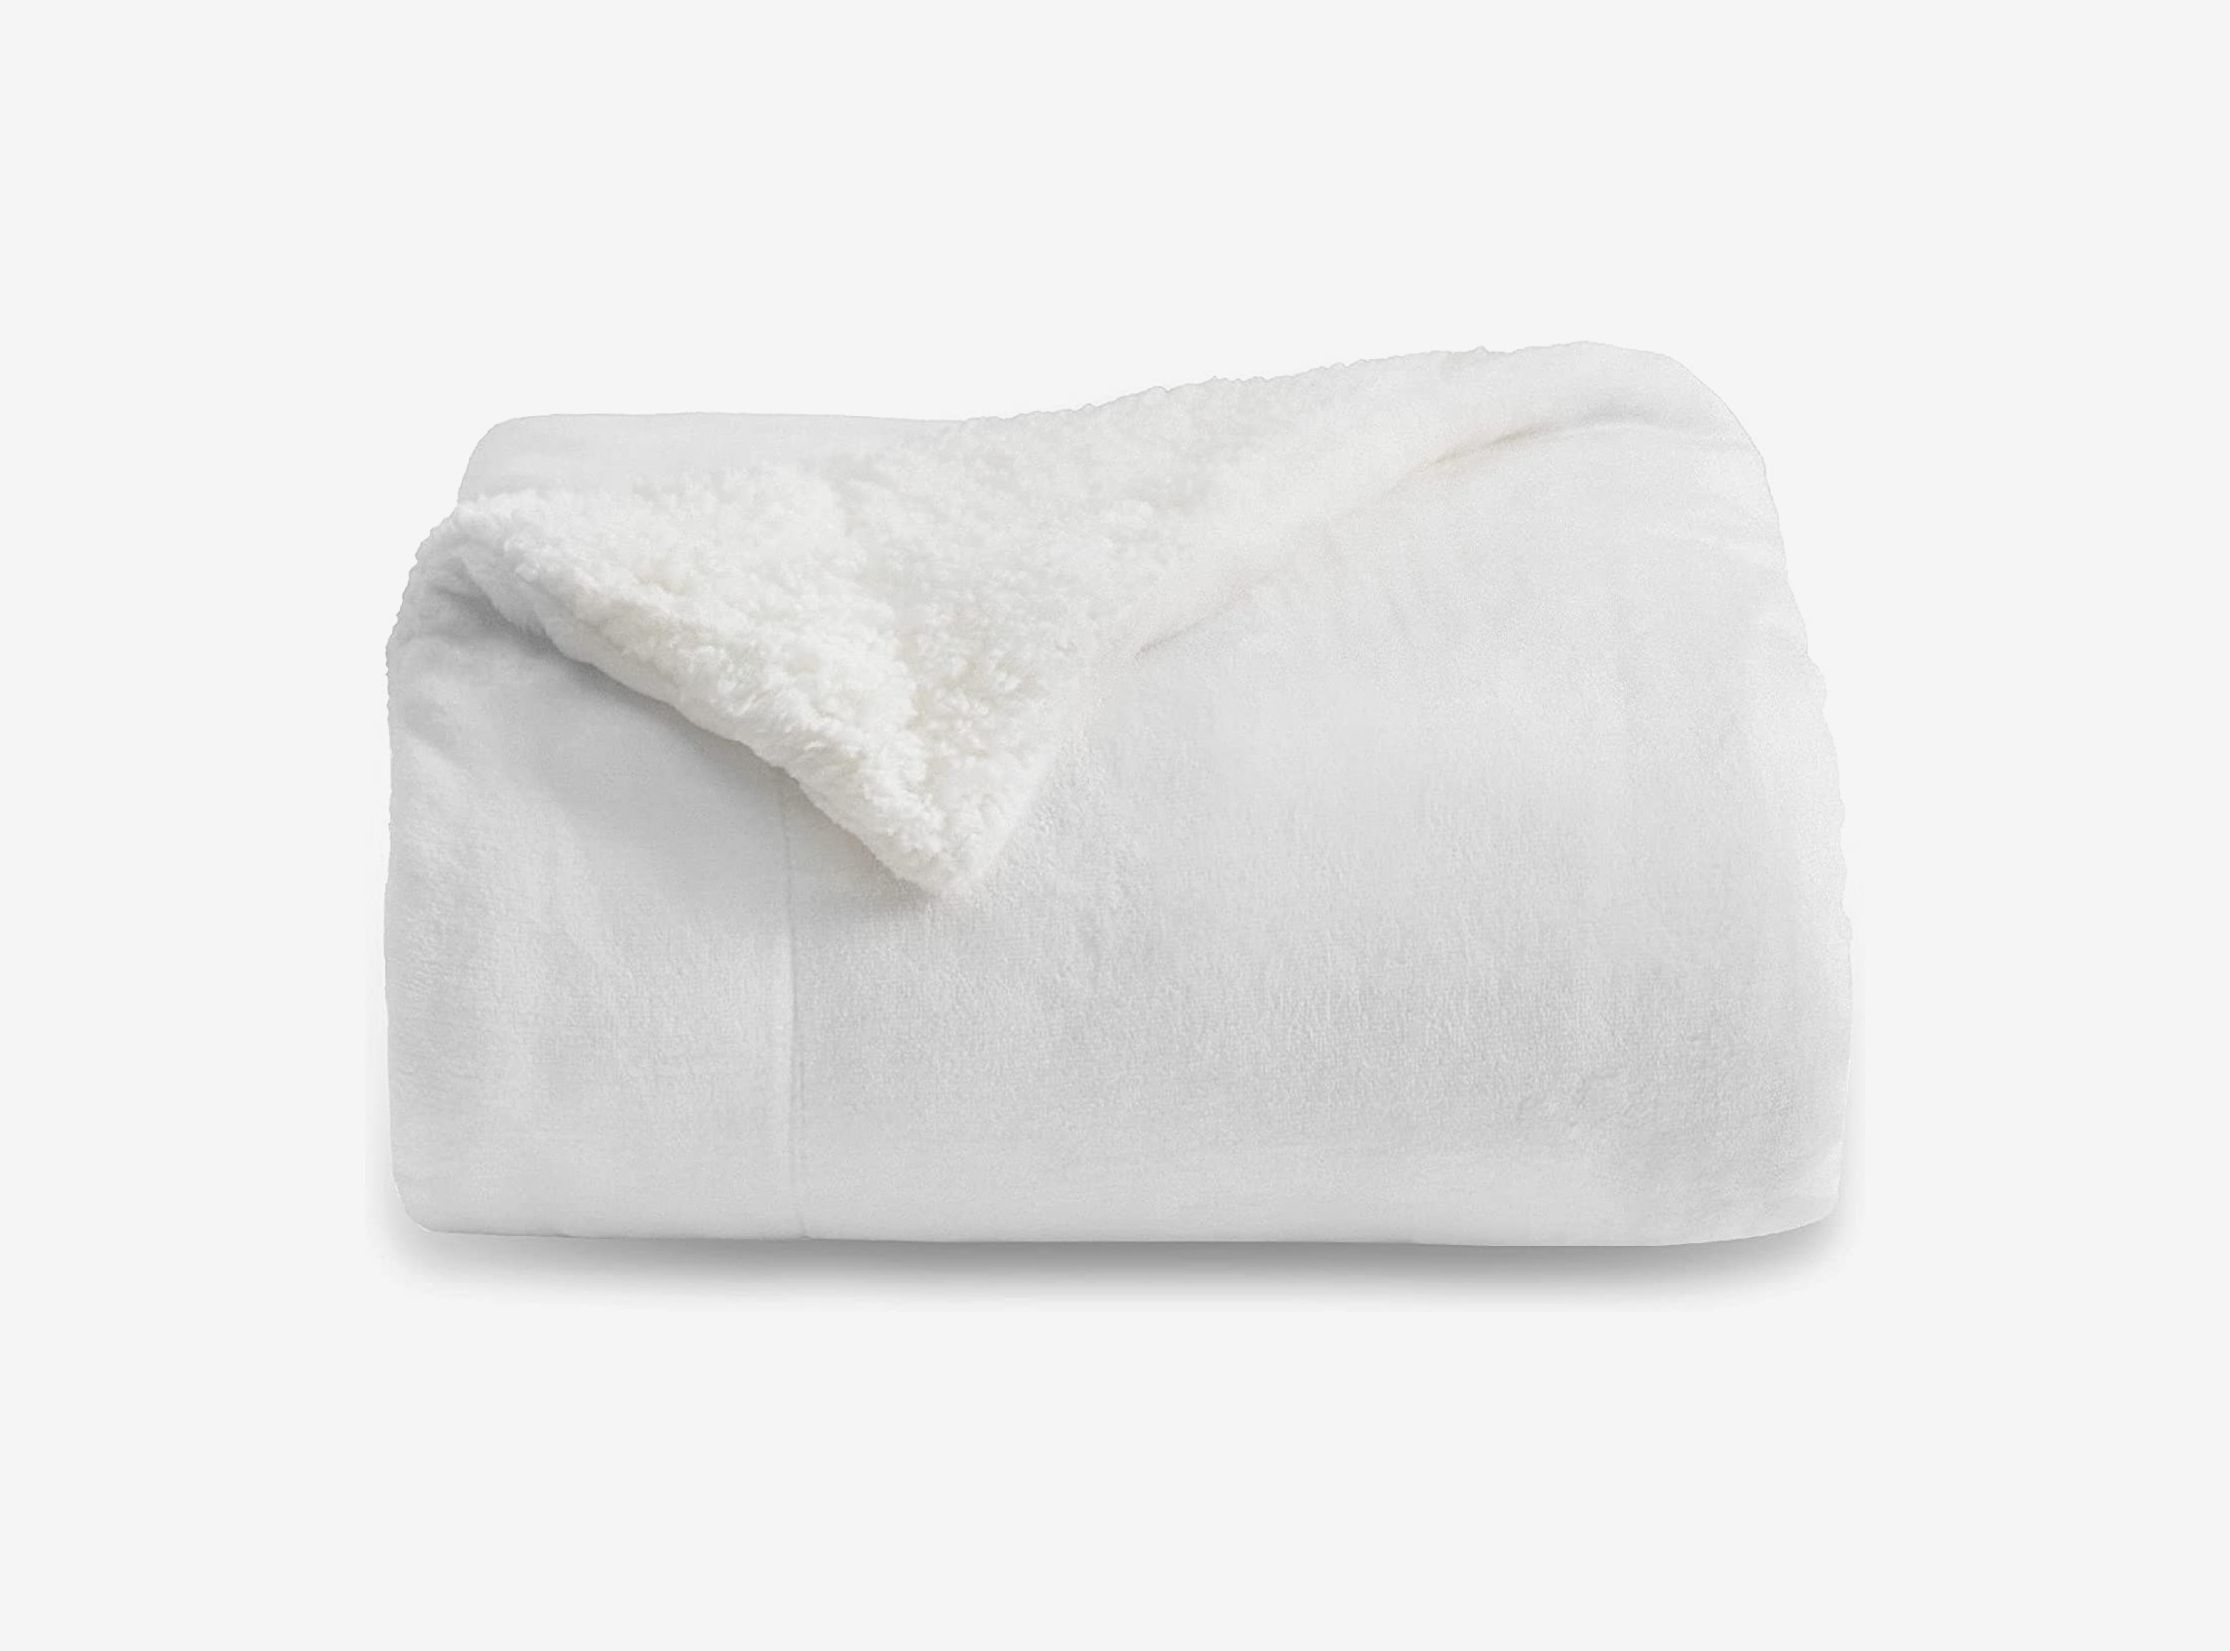 XX-LV Ultra Soft Micro Fleece Blanket Light Weight Luxury Cozy Warm Fluffy  Plush Hypoallergenic Blanket for Bed Chair Autumn Winter Spring Living Room  : : Home & Kitchen